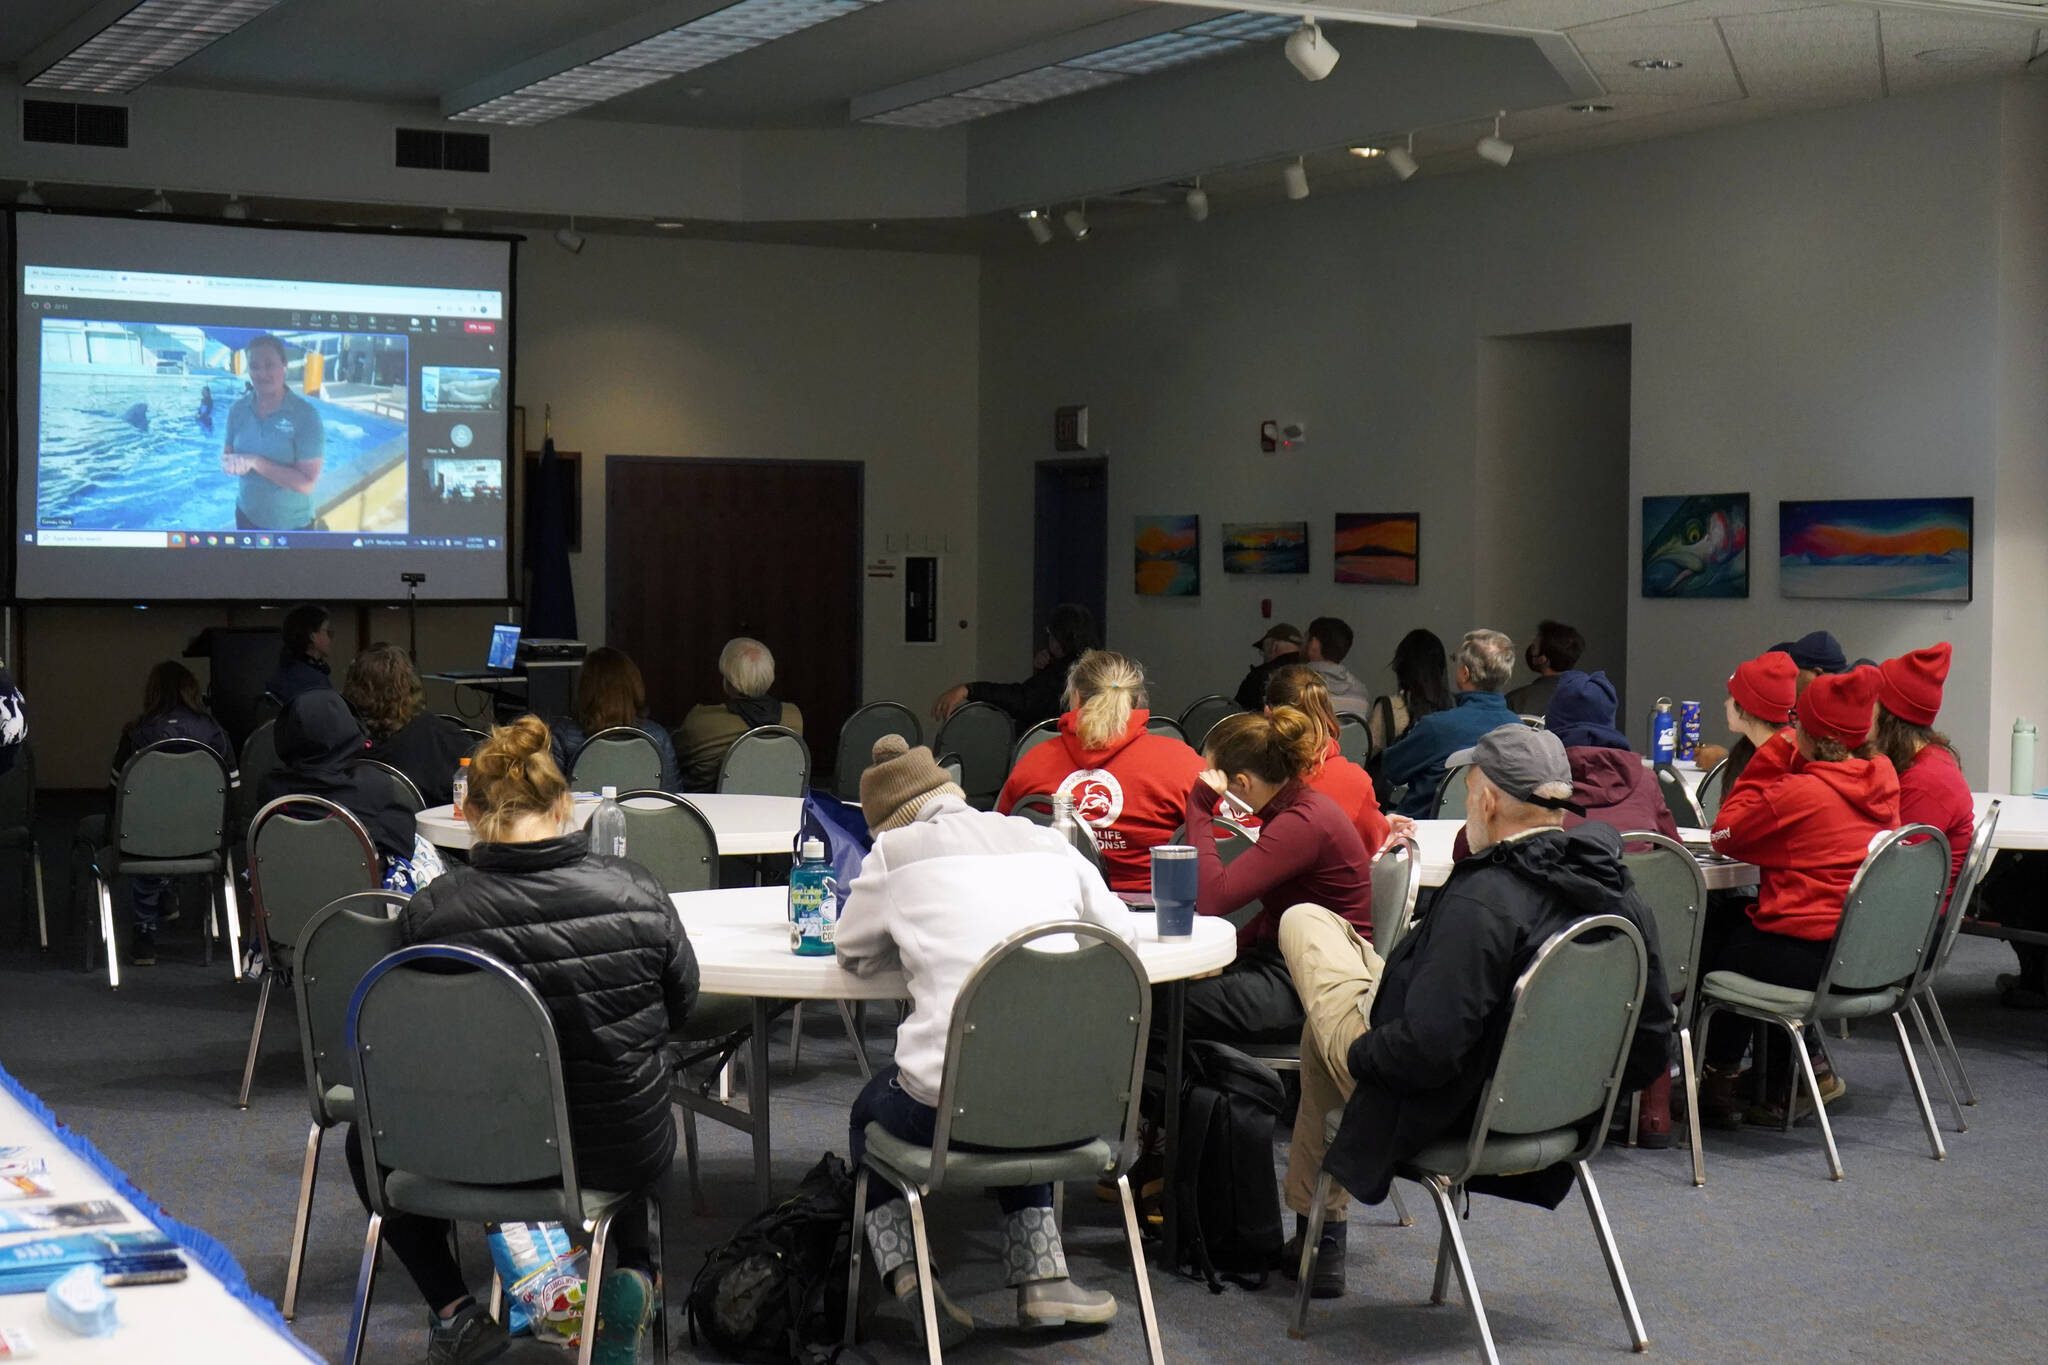 Attendees, staff and volunteers gather for a video conference with SeaWorld San Antonio, where a Cook Inlet beluga named Tyonek was successfully rehabilitated and still lives, during a festival held as part of Belugas Count! at the Kenai Chamber of Commerce in Kenai, Alaska, on Saturday, Sept. 23, 2023. (Jake Dye/Peninsula Clarion)